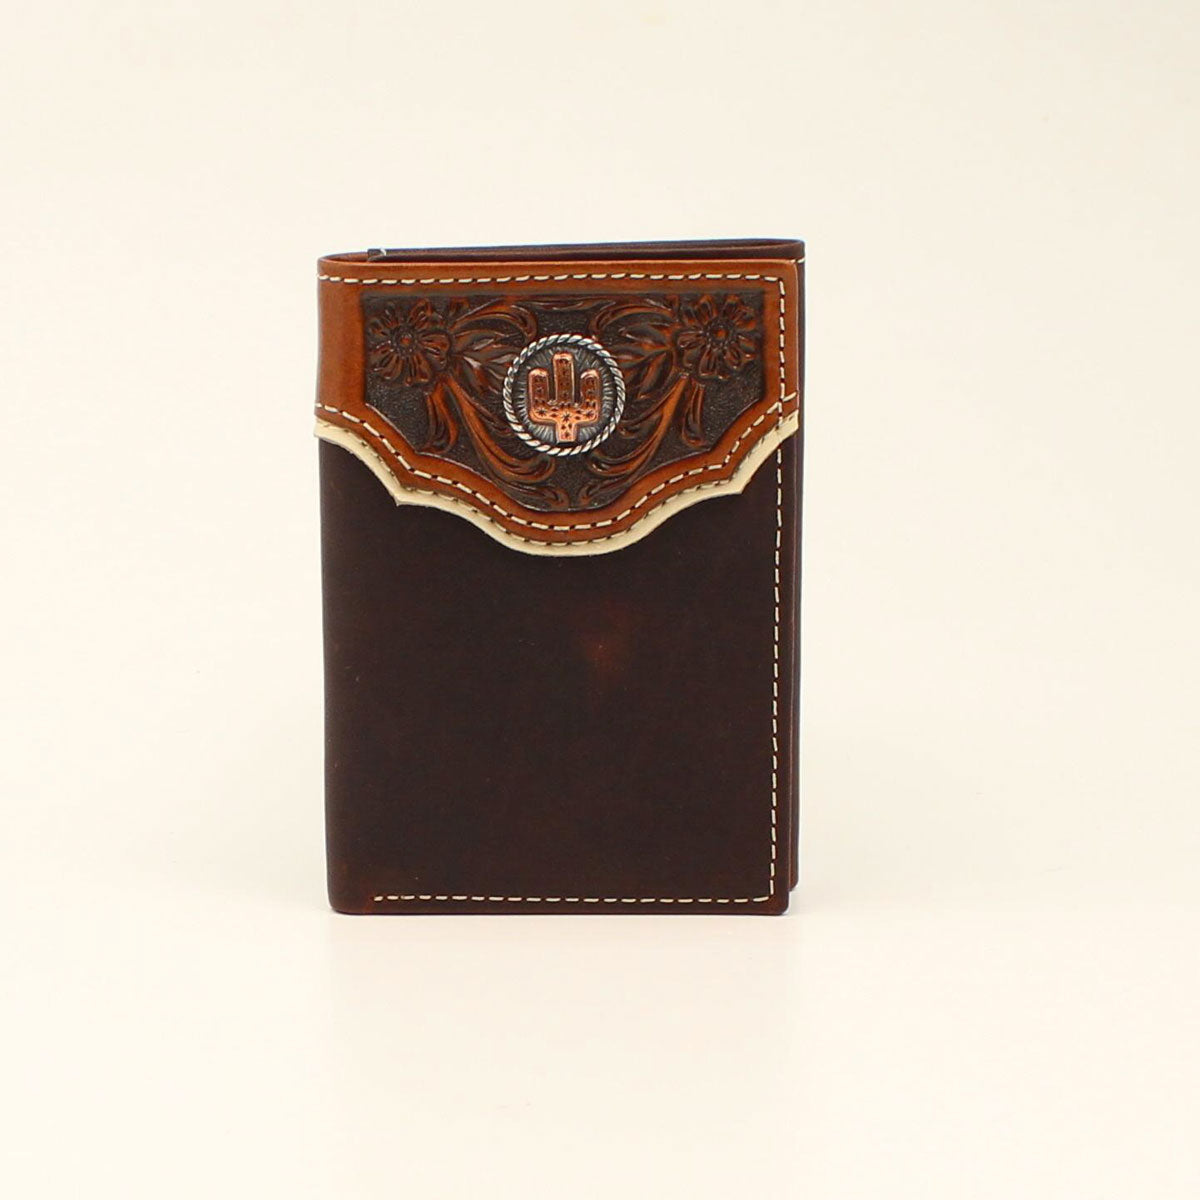 MENS NOCONA TRIFOLD WALLET W/ EMBOSSED OVERLAY